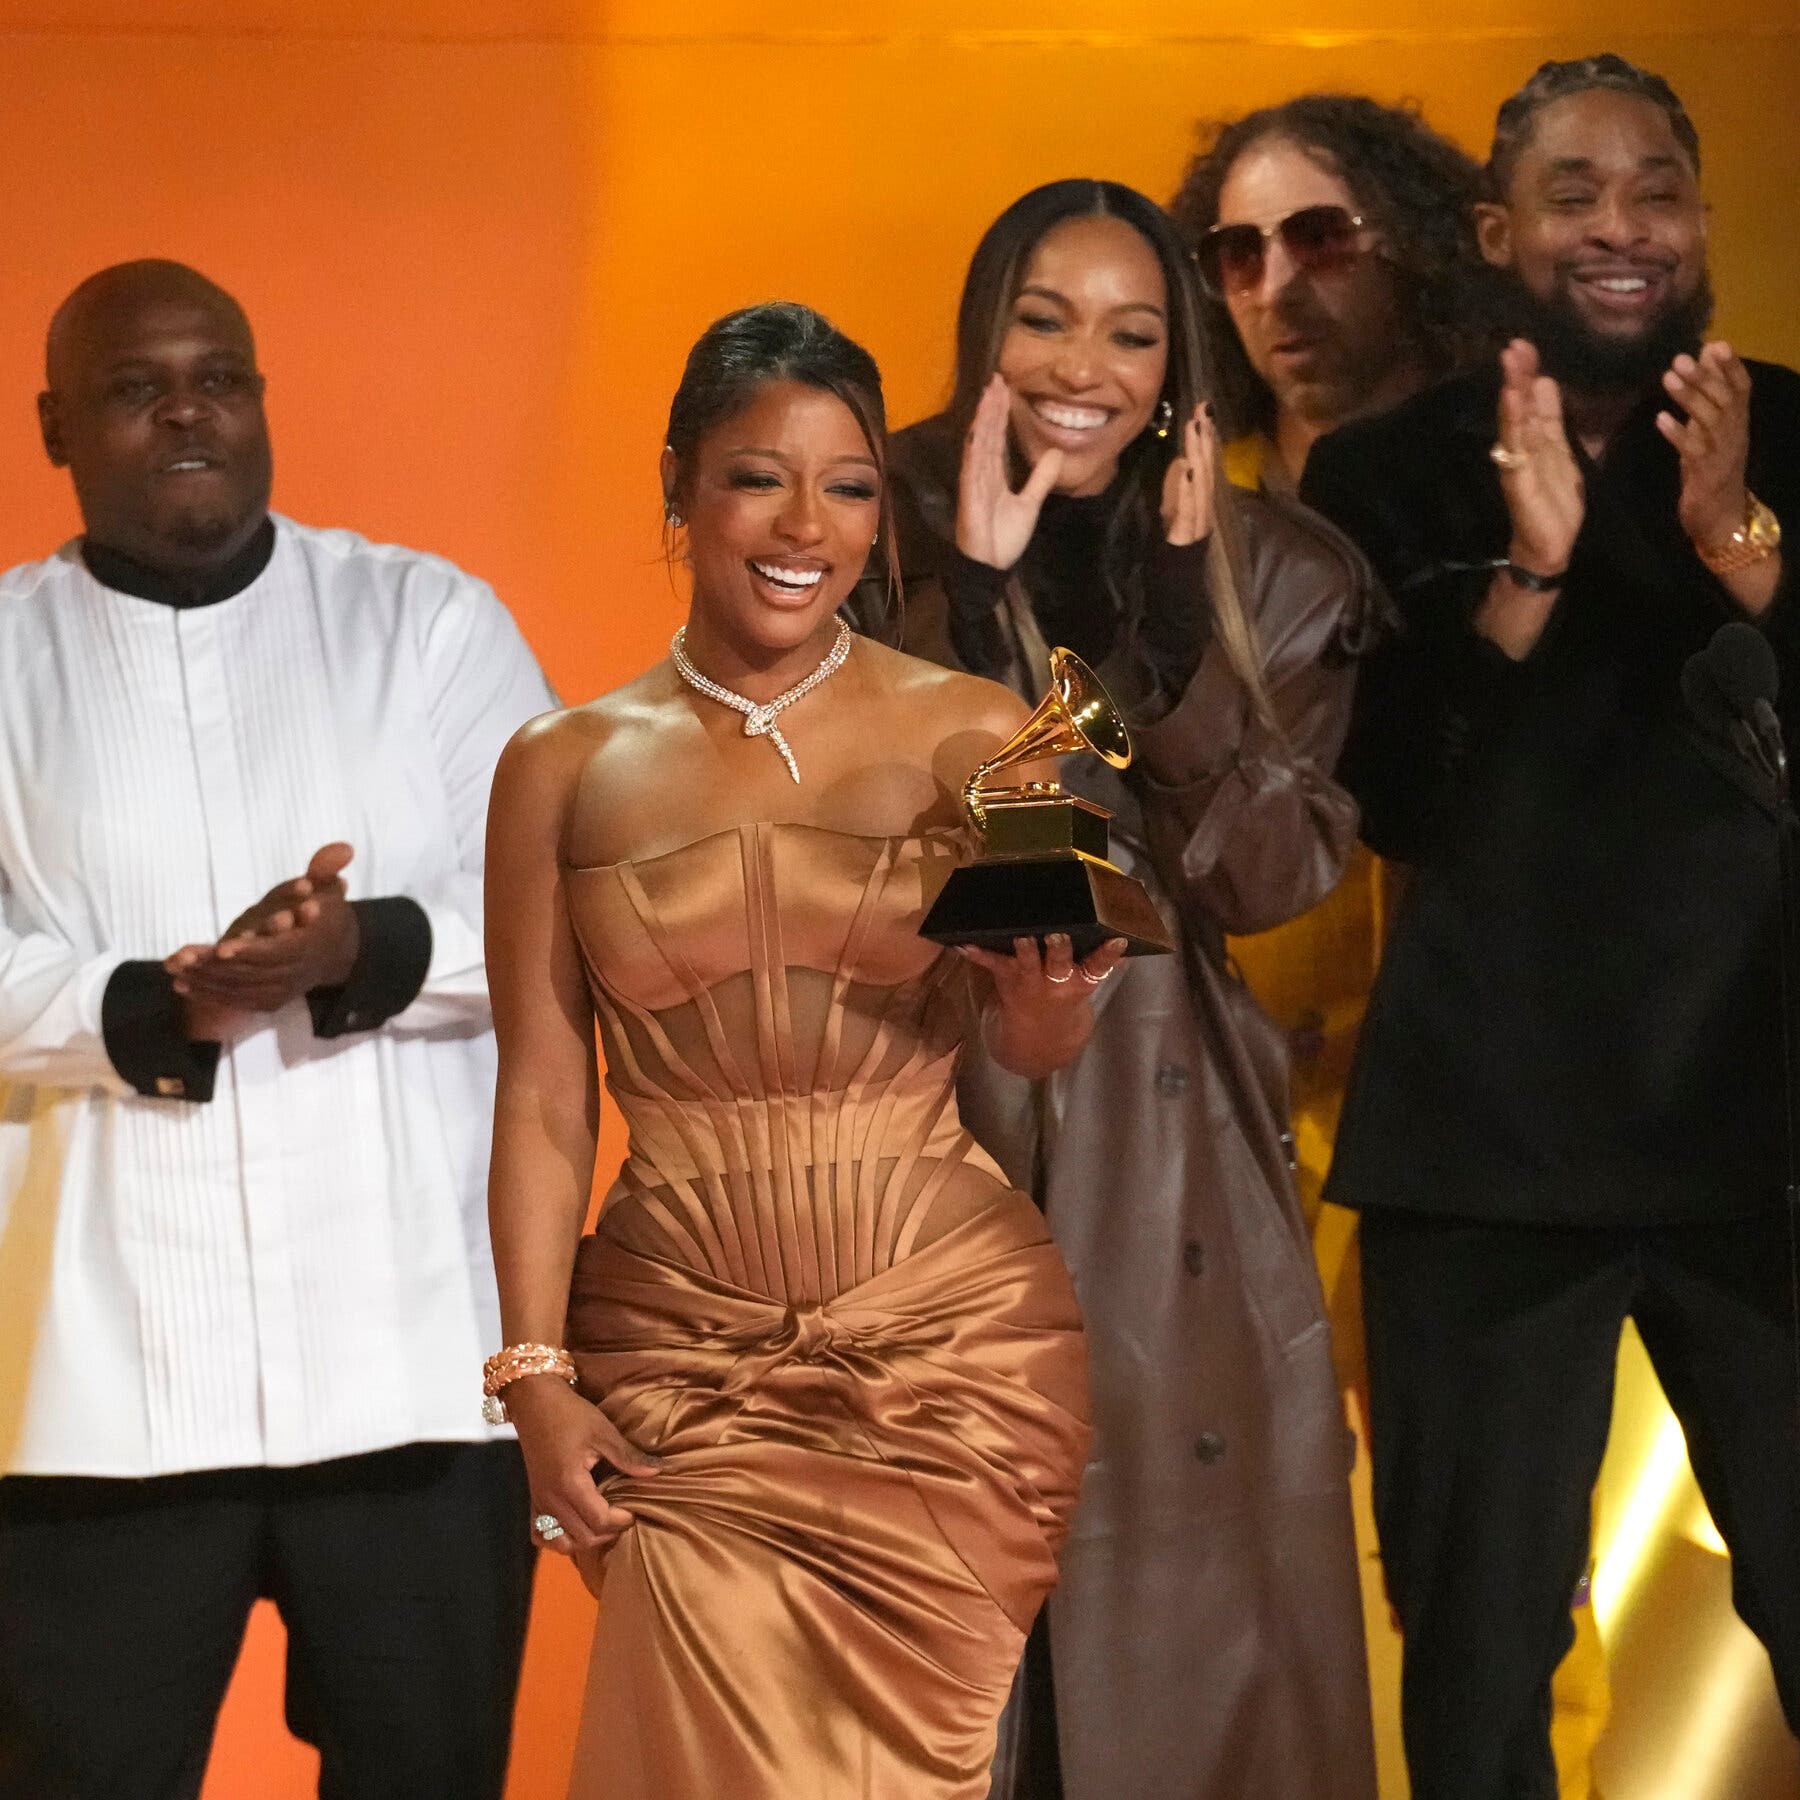 Victoria Monét converted one of her seven Grammy nominations into a win for best new artist.Credit...Chris Pizzello/Invision, via Associated Press